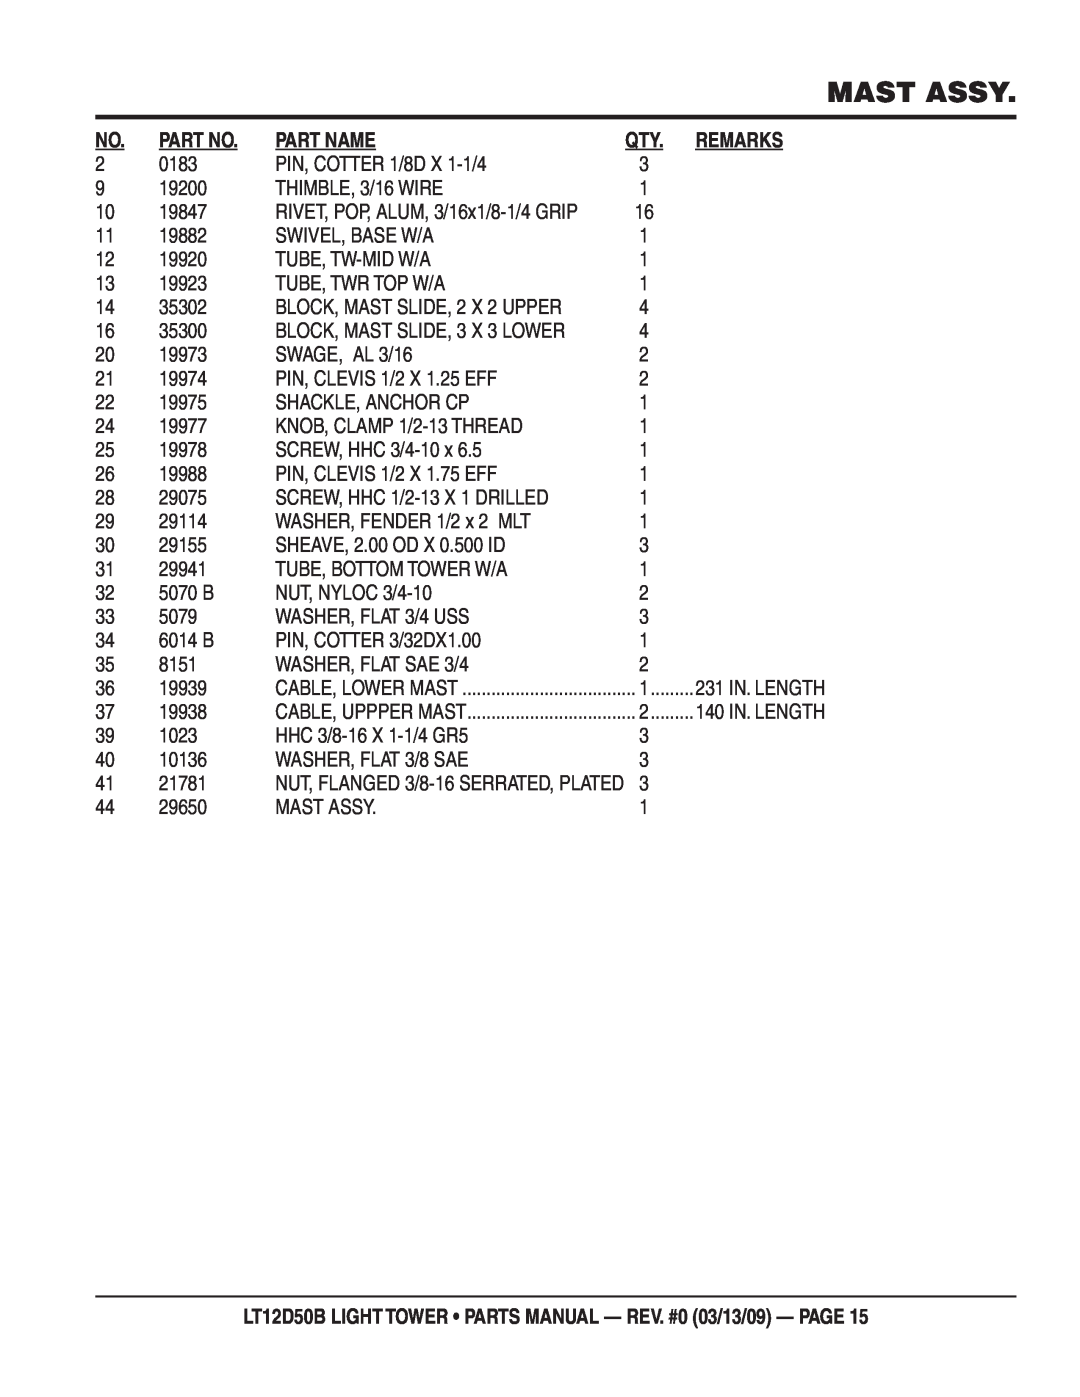 Multiquip Mast Assy, Part Name, Remarks, LT12D50B LIGHT TOWER PARTS MANUAL - REV. #0 03/13/09 - PAGE, 231 IN. LENGTH 